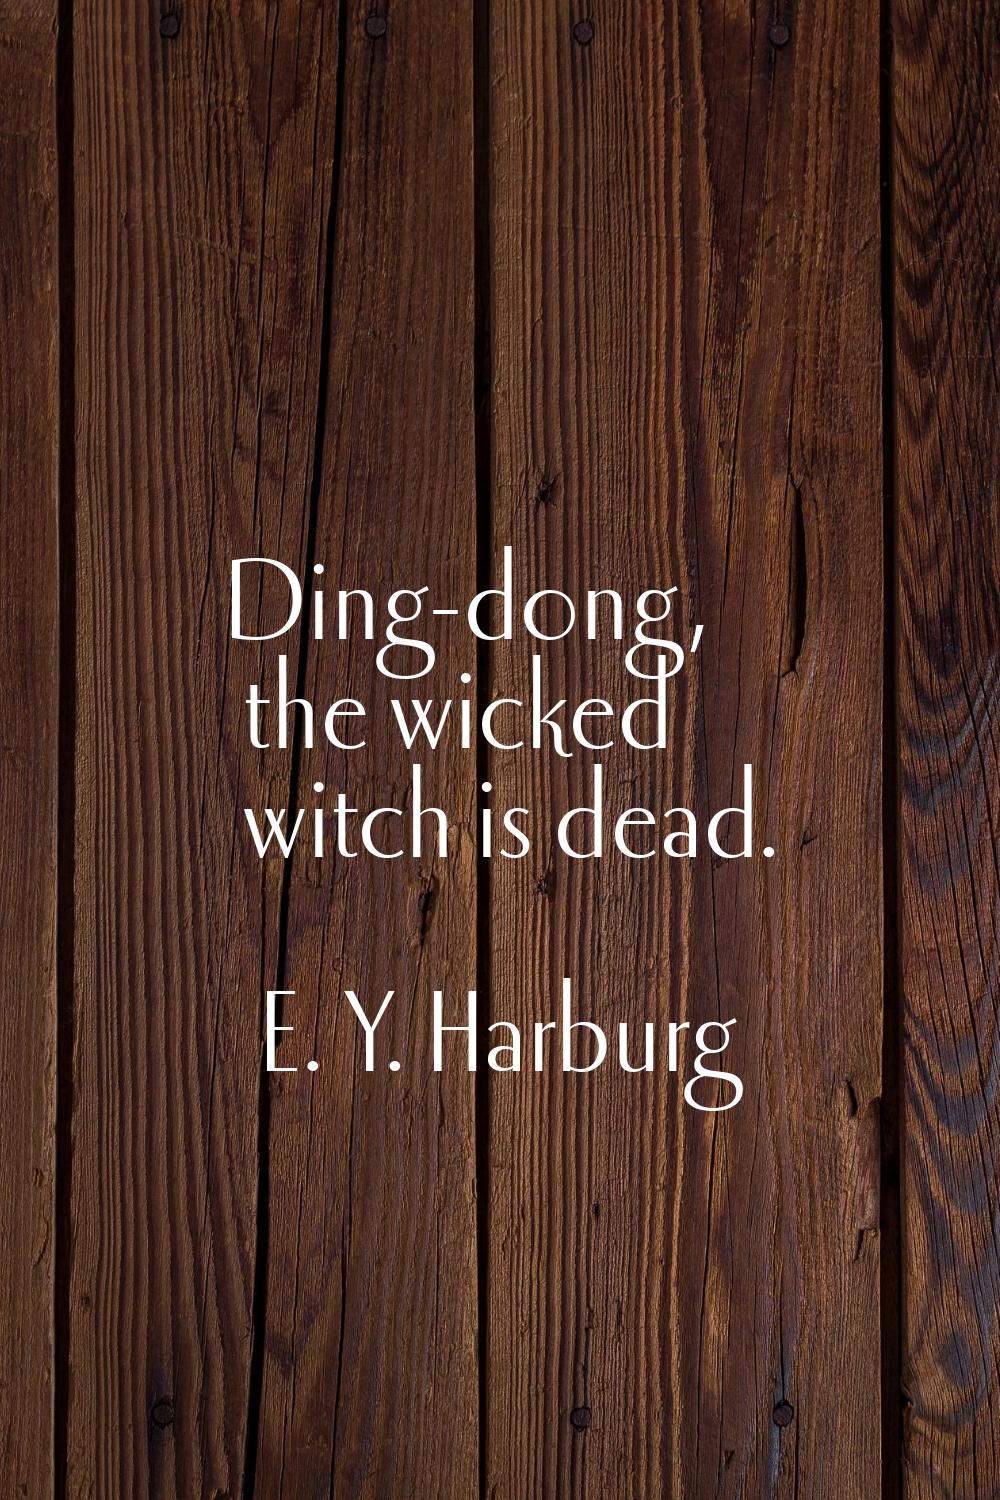 Ding-dong, the wicked witch is dead.